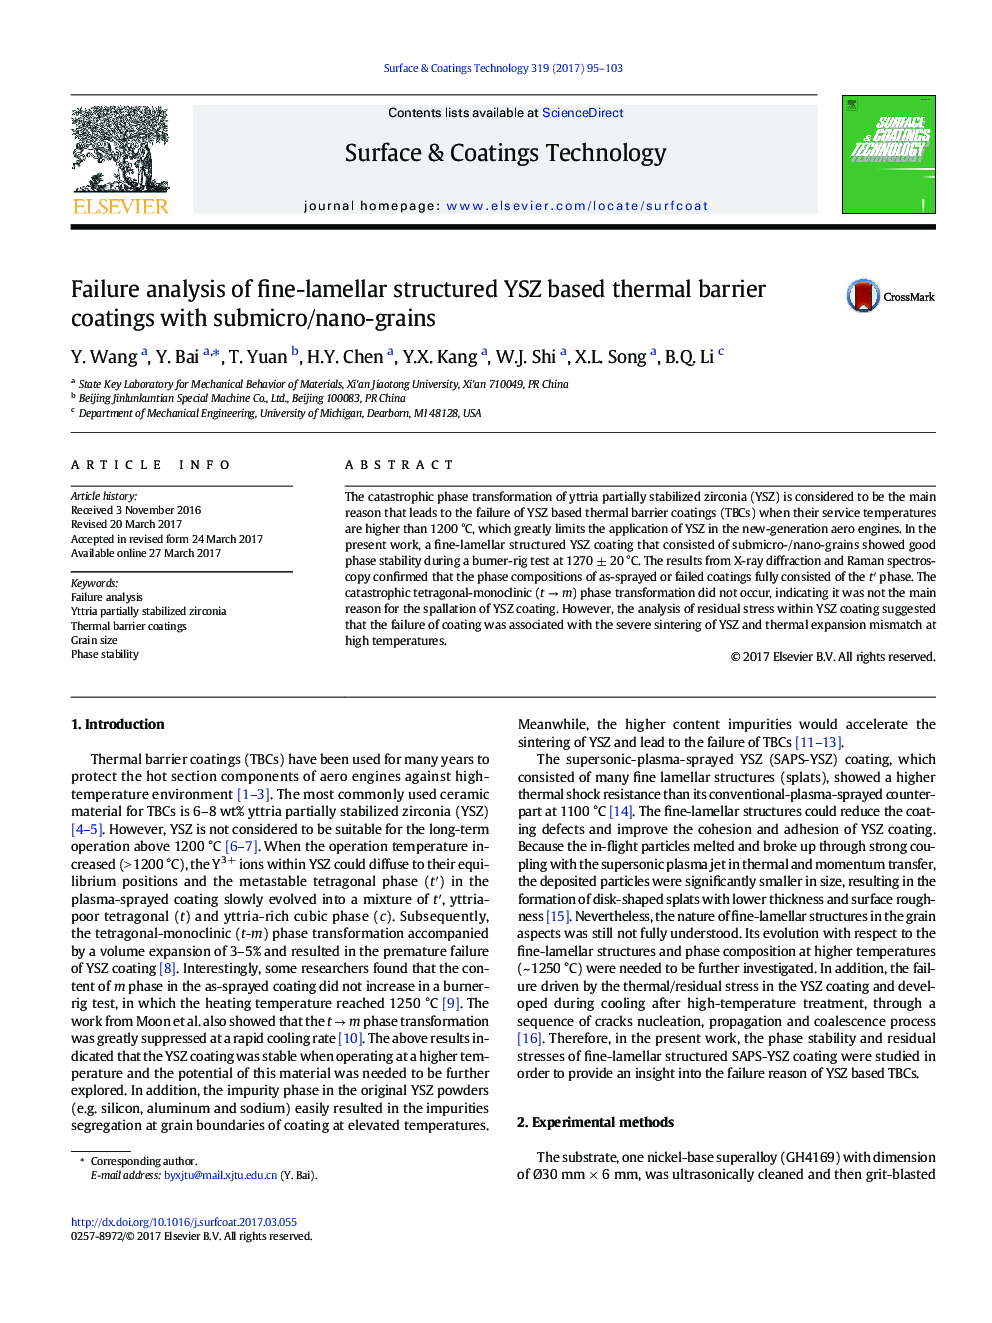 Failure analysis of fine-lamellar structured YSZ based thermal barrier coatings with submicro/nano-grains